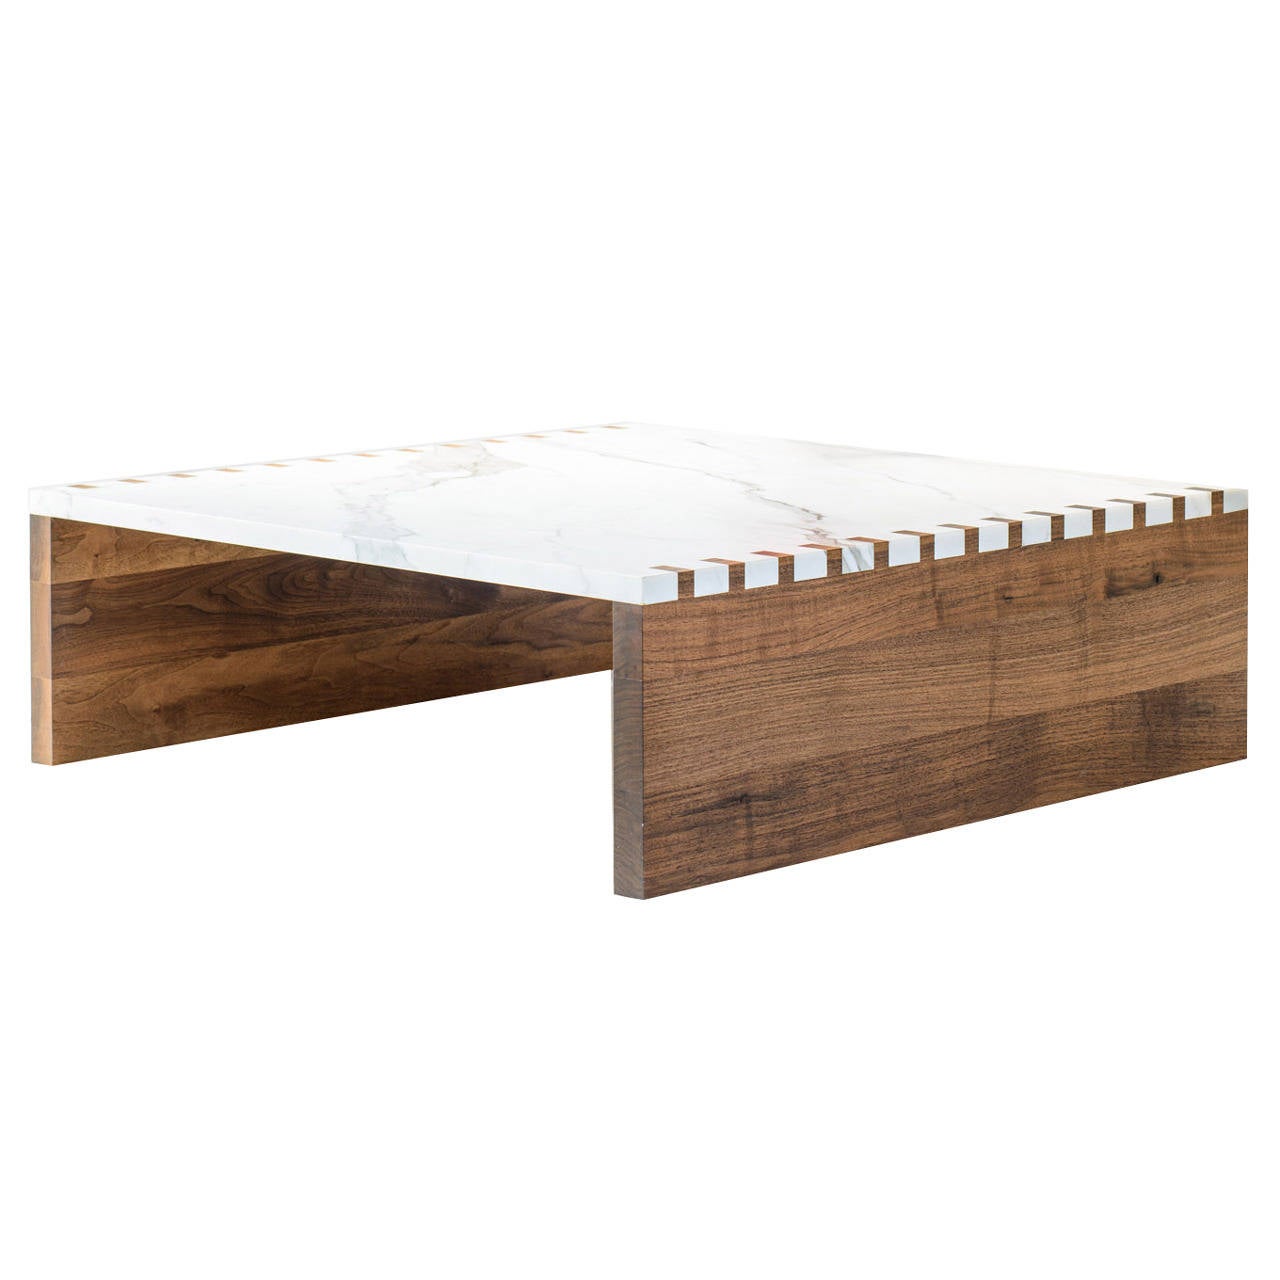 Zaragosa coffee table in Calacatta marble with walnut sides and box joint detail, new, offered by KGBL